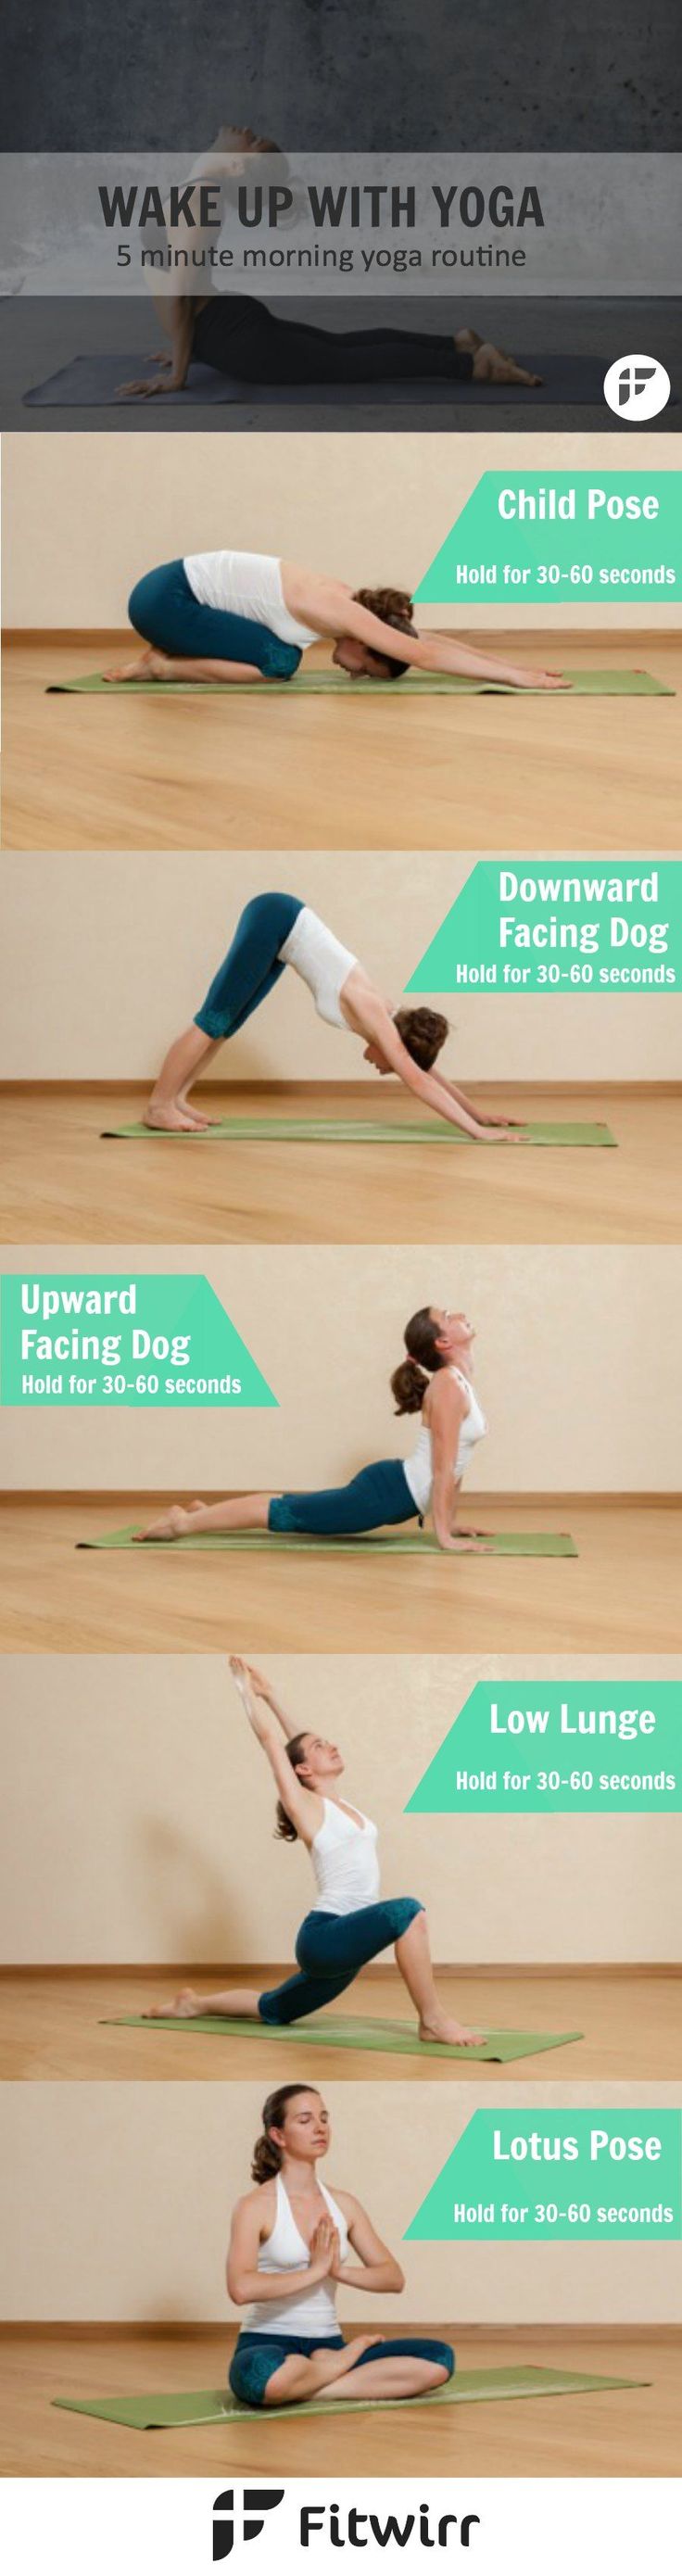 5-Minute Morning Yoga Workout.